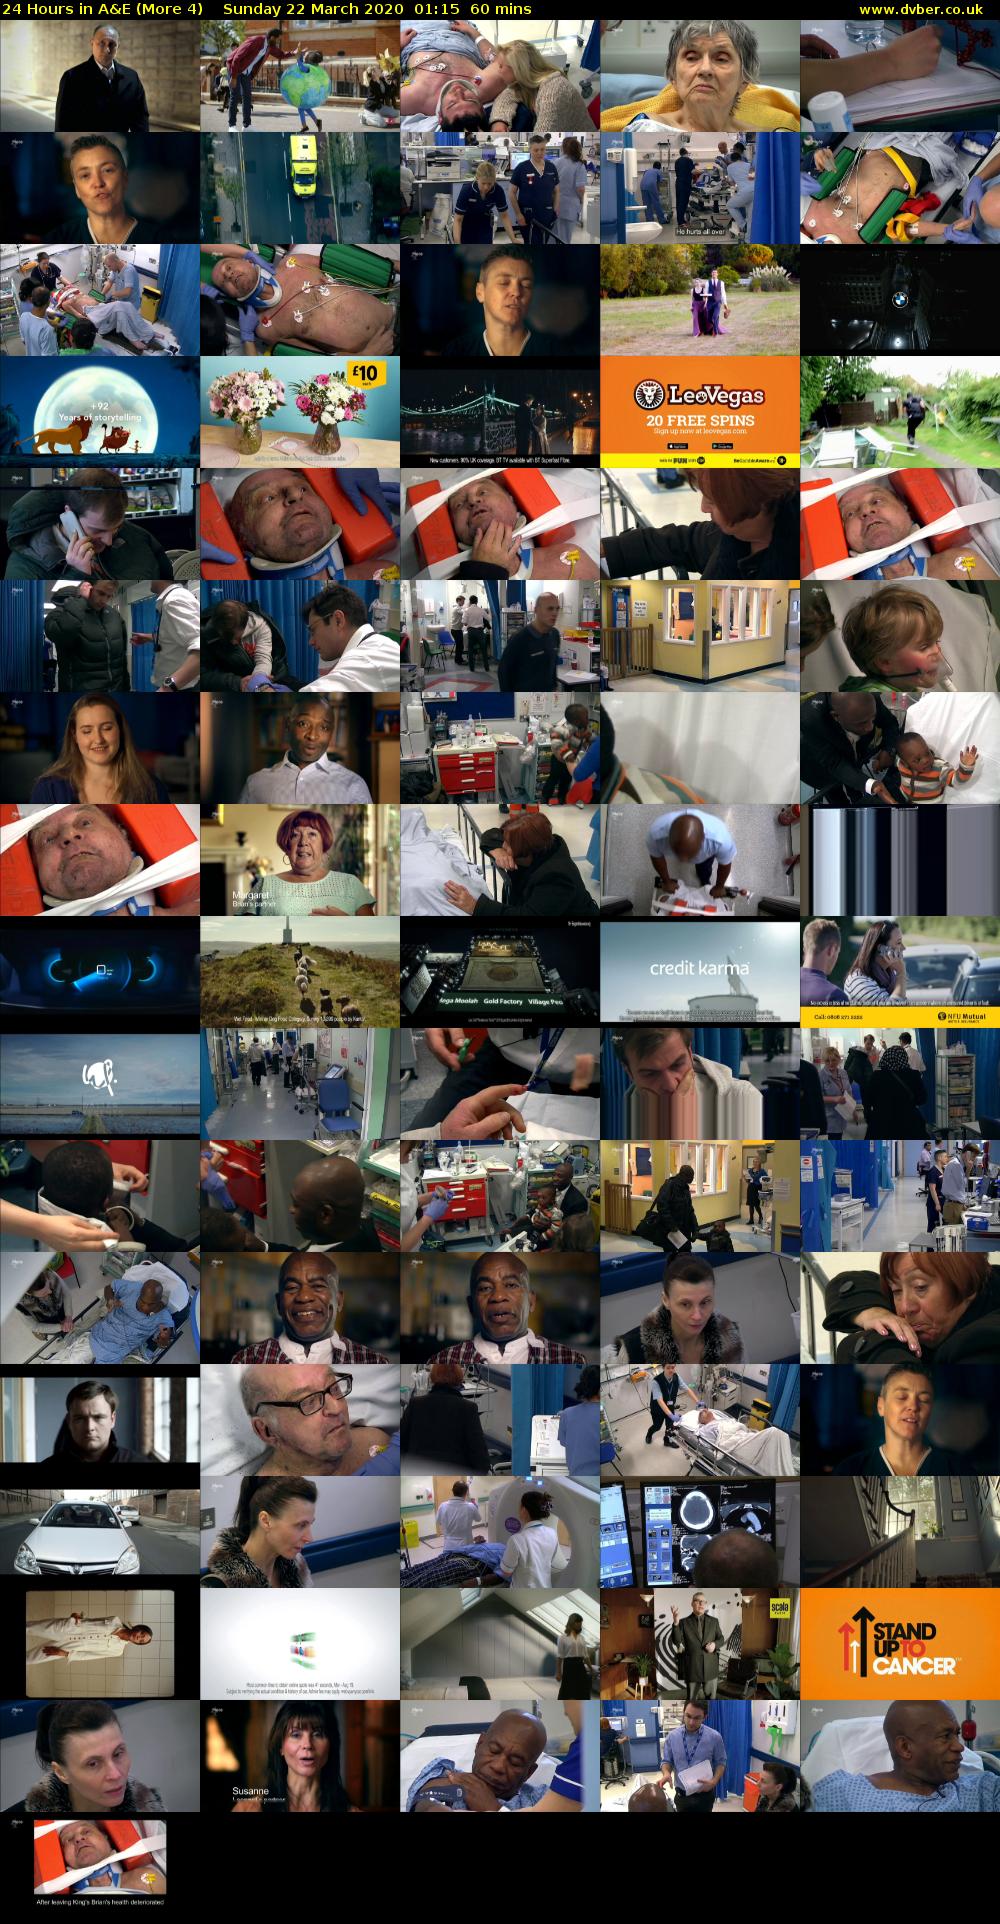 24 Hours in A&E (More 4) Sunday 22 March 2020 01:15 - 02:15